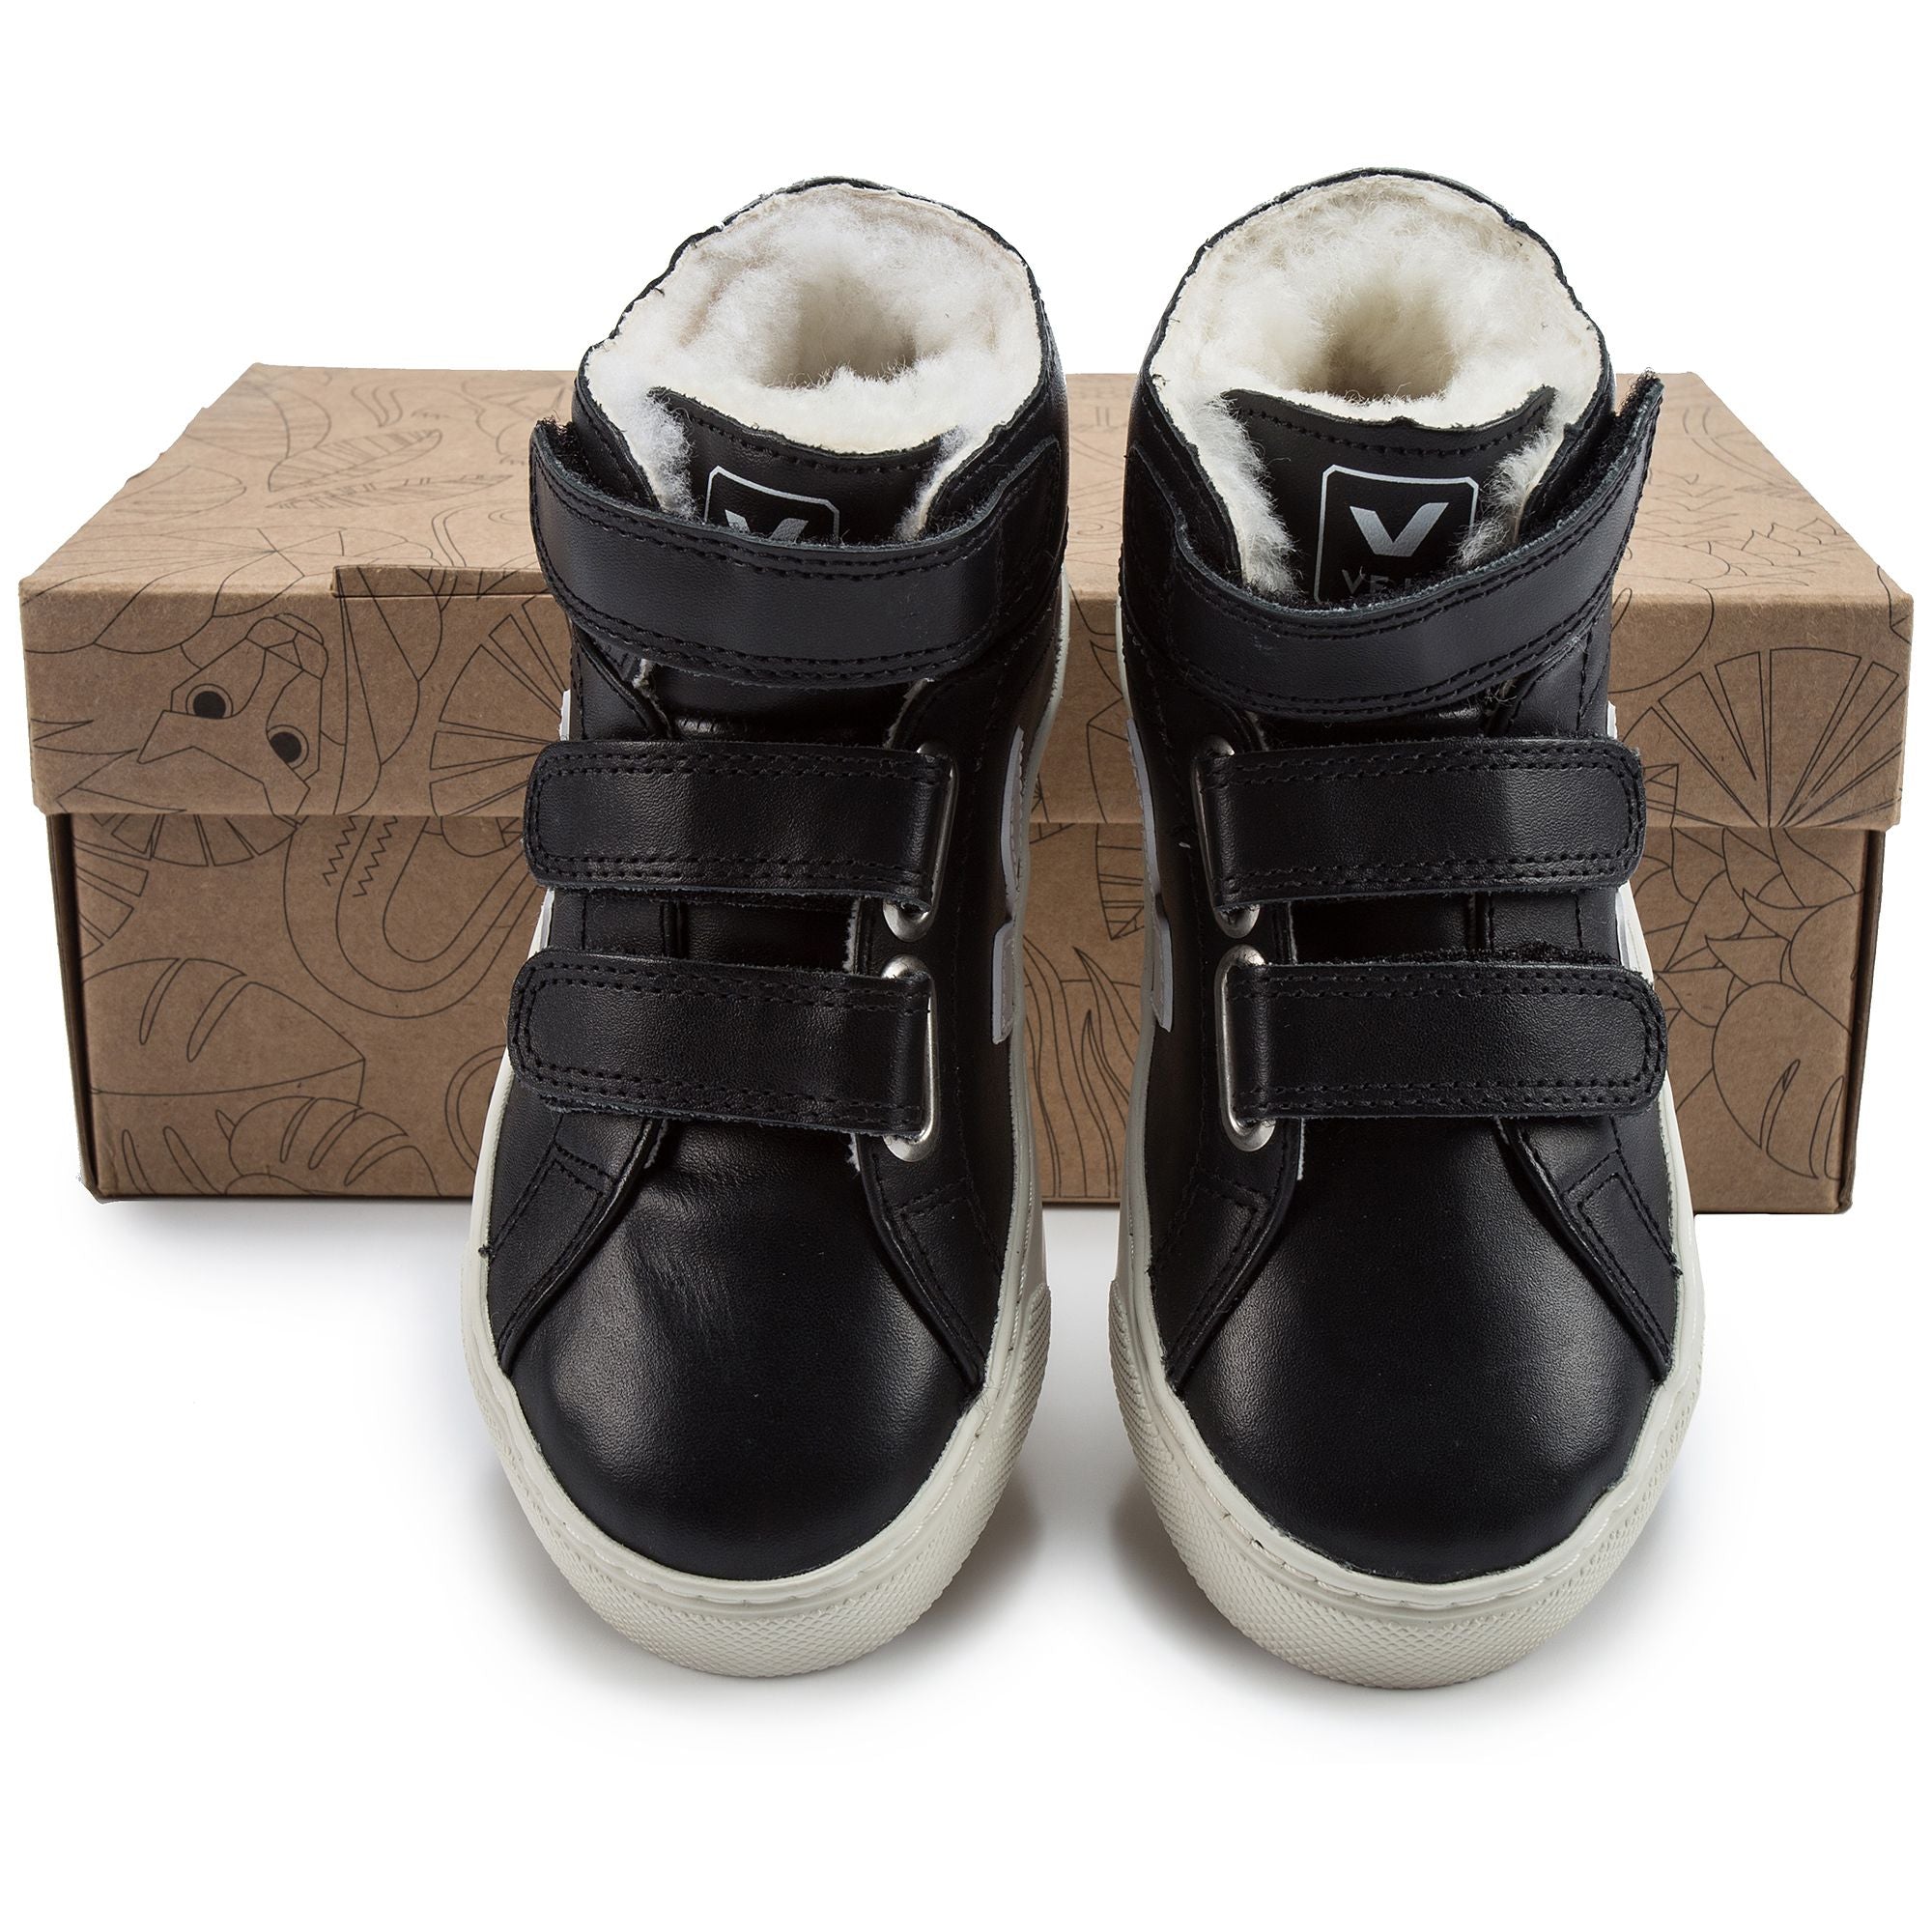 Boys Black Leather Velcro High Top Shoes